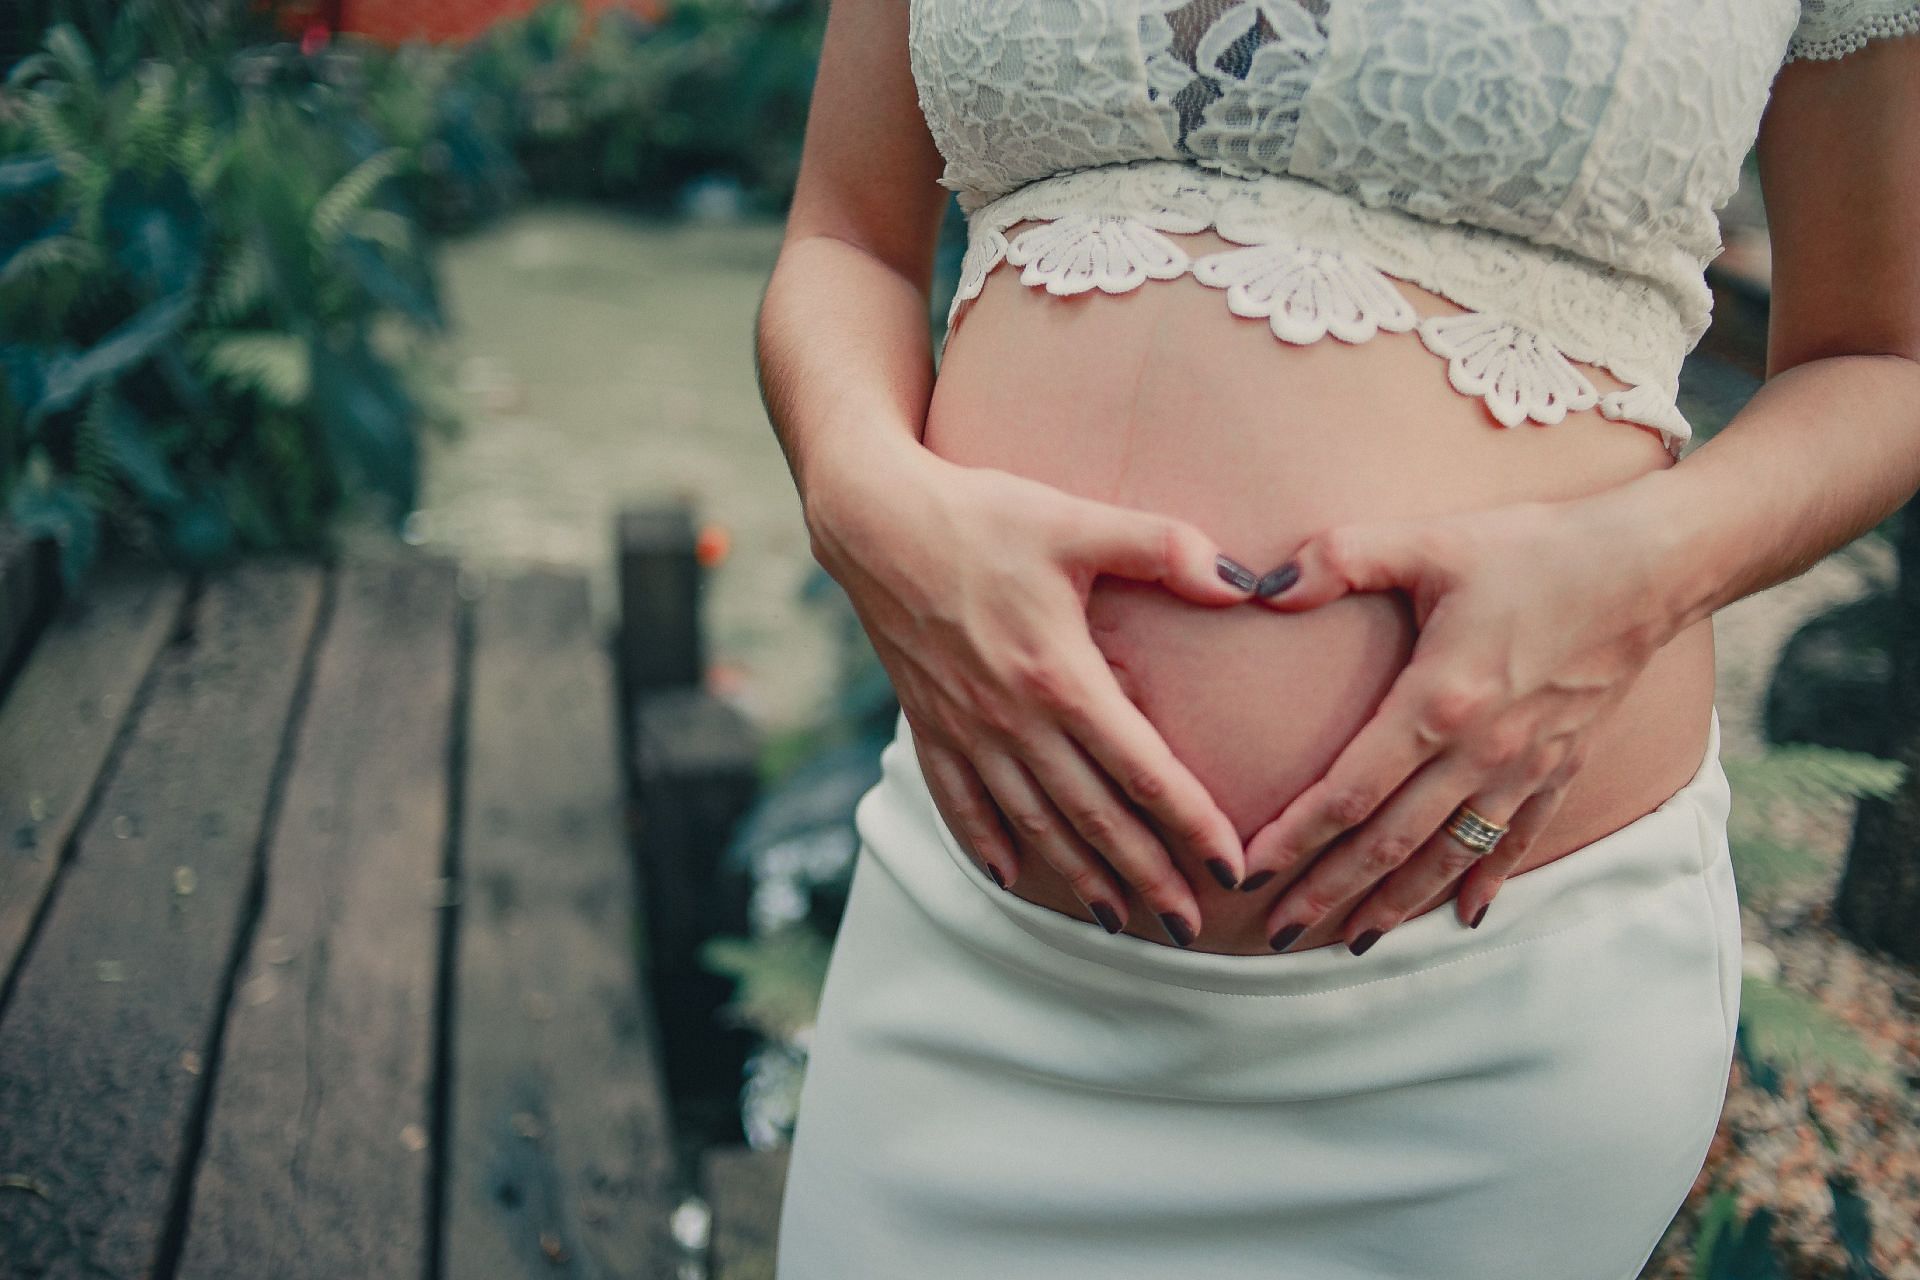 Hormonal changes may also cause pregnancy itching. (Image via Pexels/ Garon Piceli)